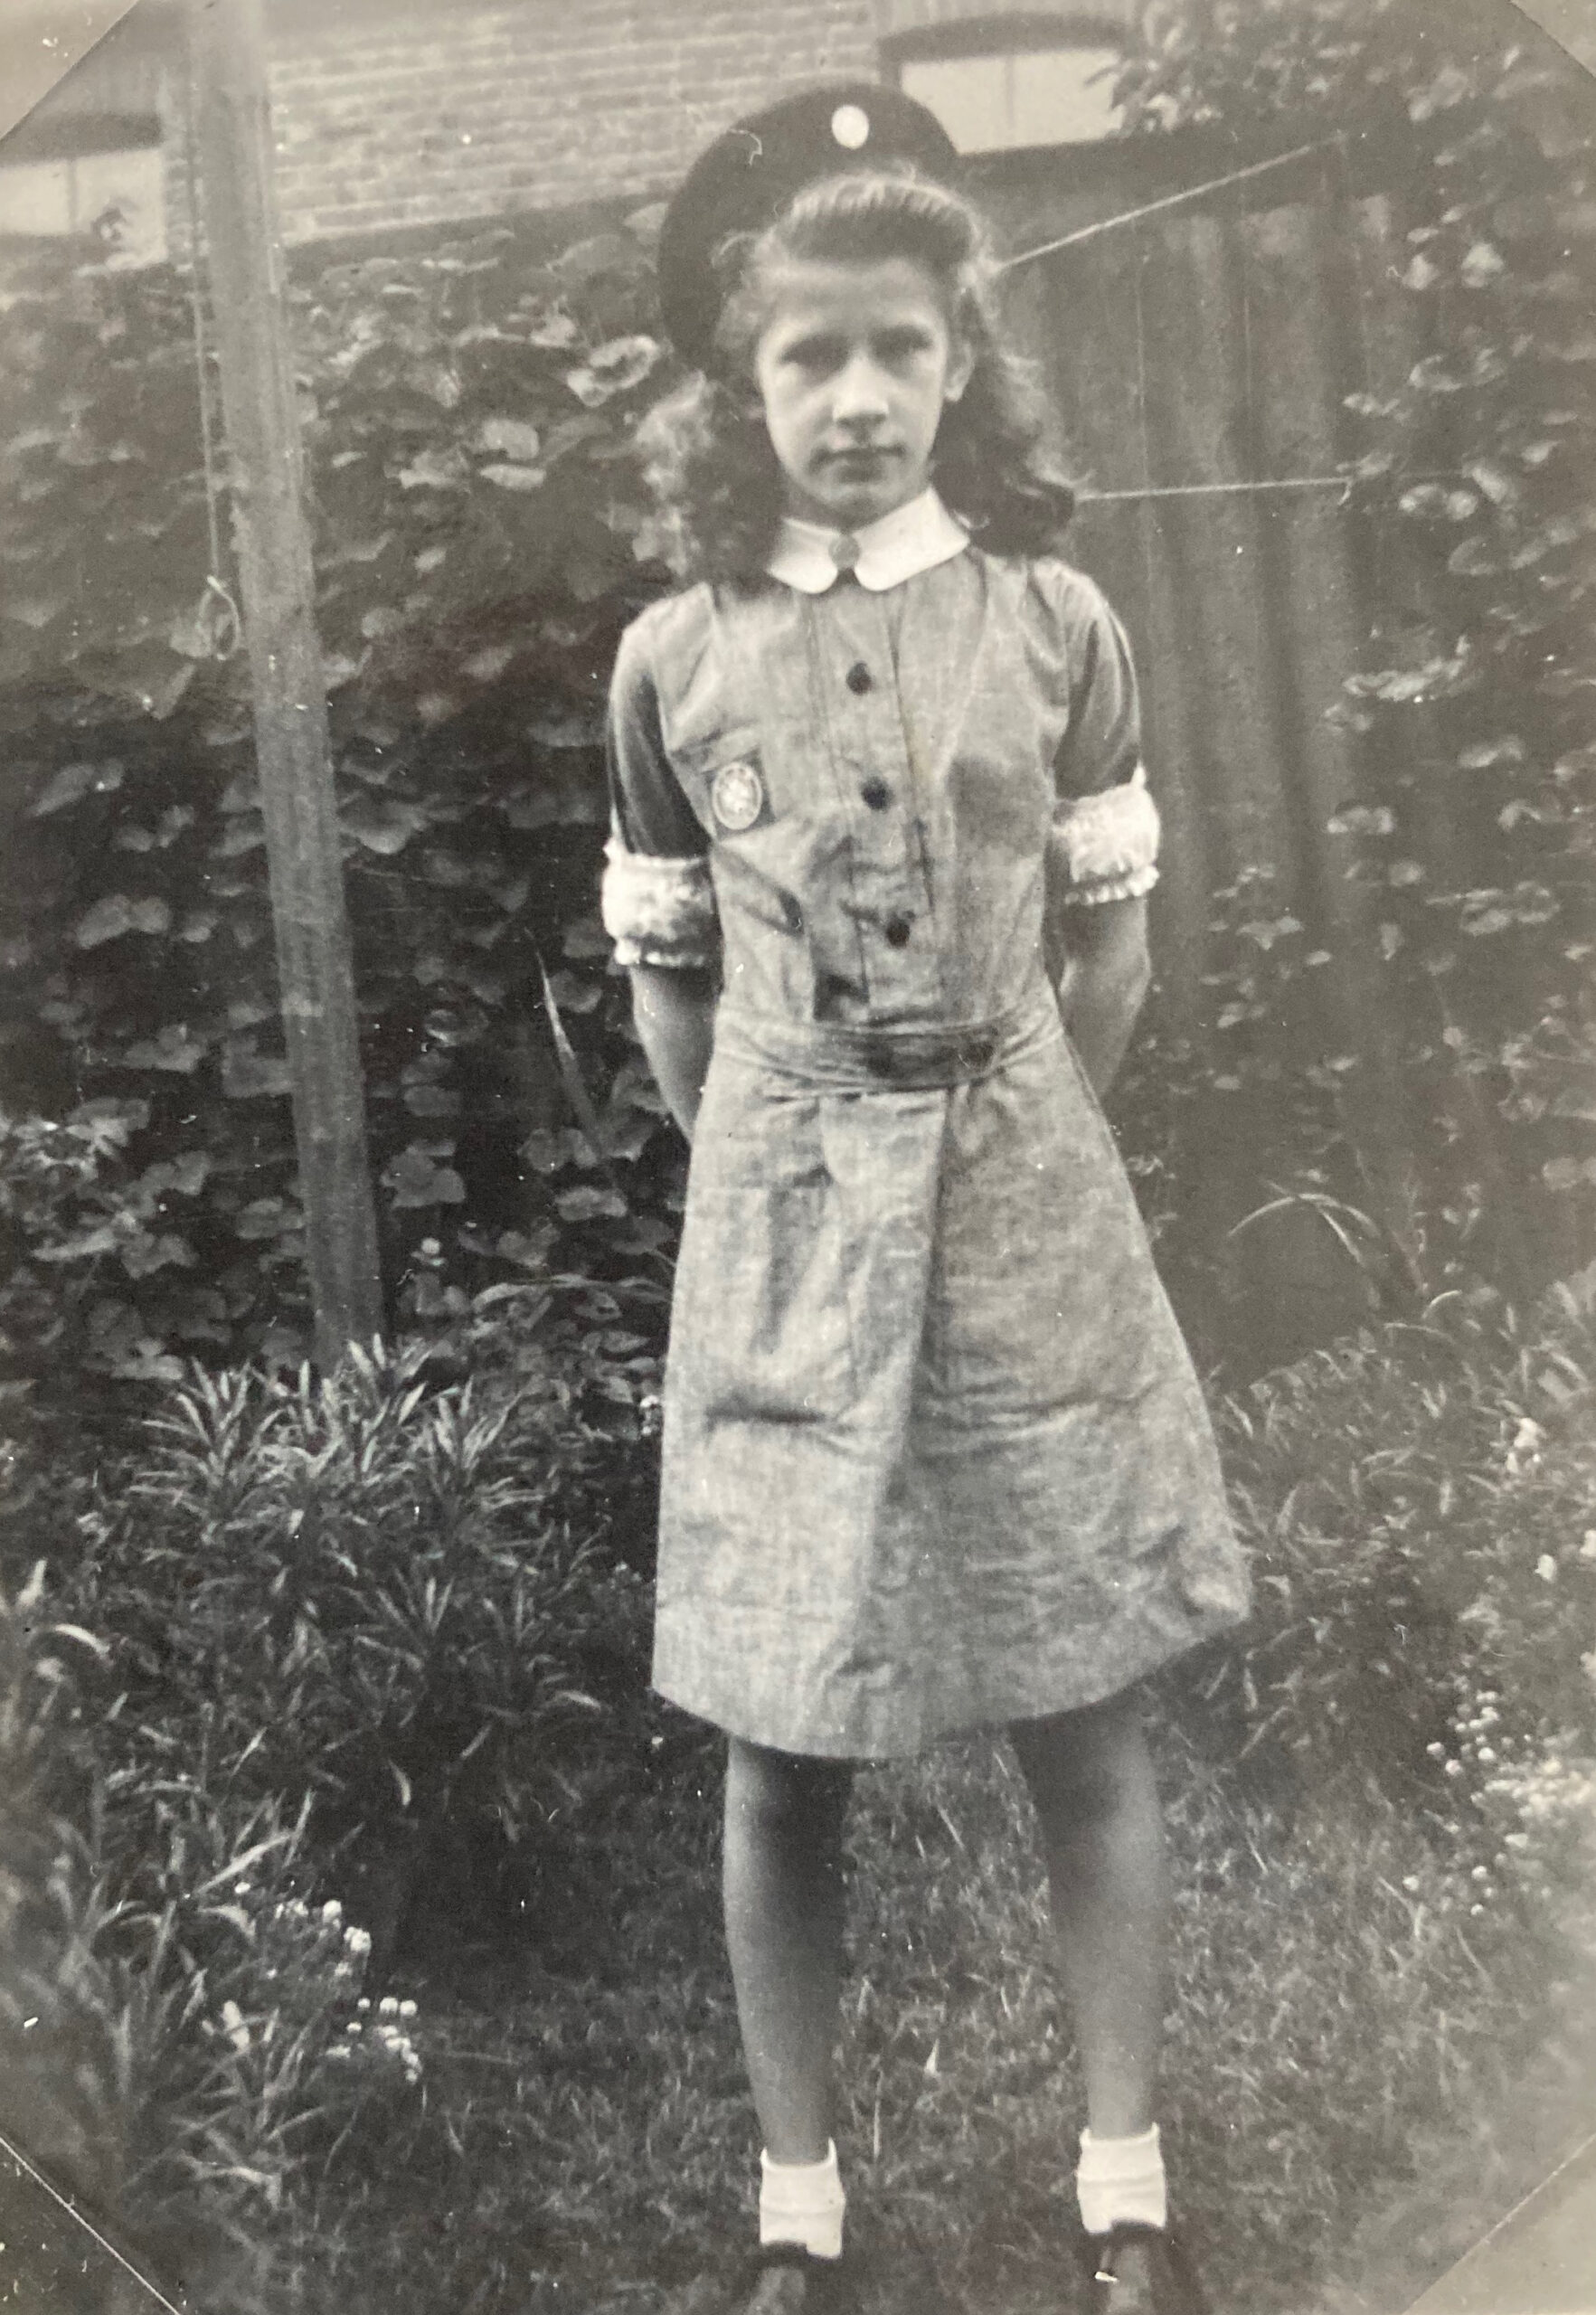 Black and white photograph of a young female Cadet in uniform. She wears a dress and a beret and is standing in a garden.